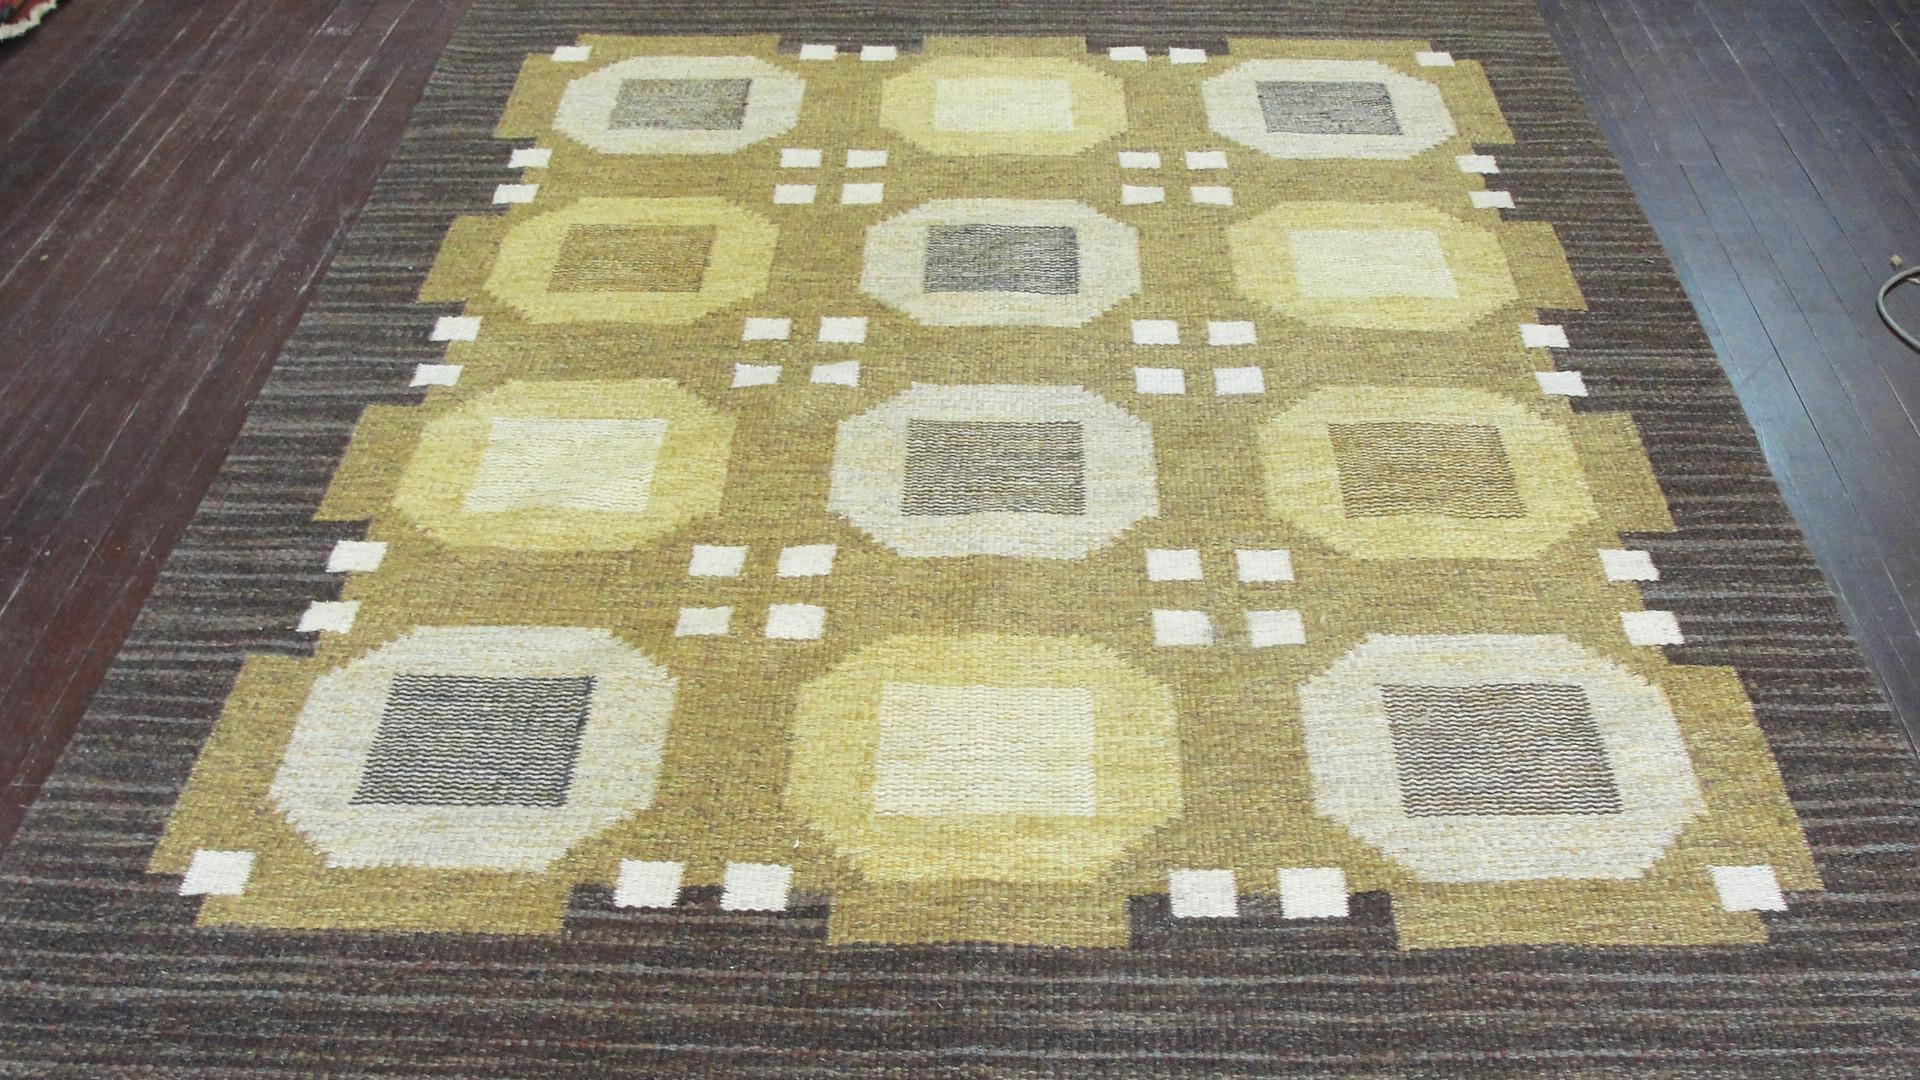 20th Century Swedish Flat-Weave Carpet by Agda Osterberg, Free Shipping In Excellent Condition For Sale In Evanston, IL